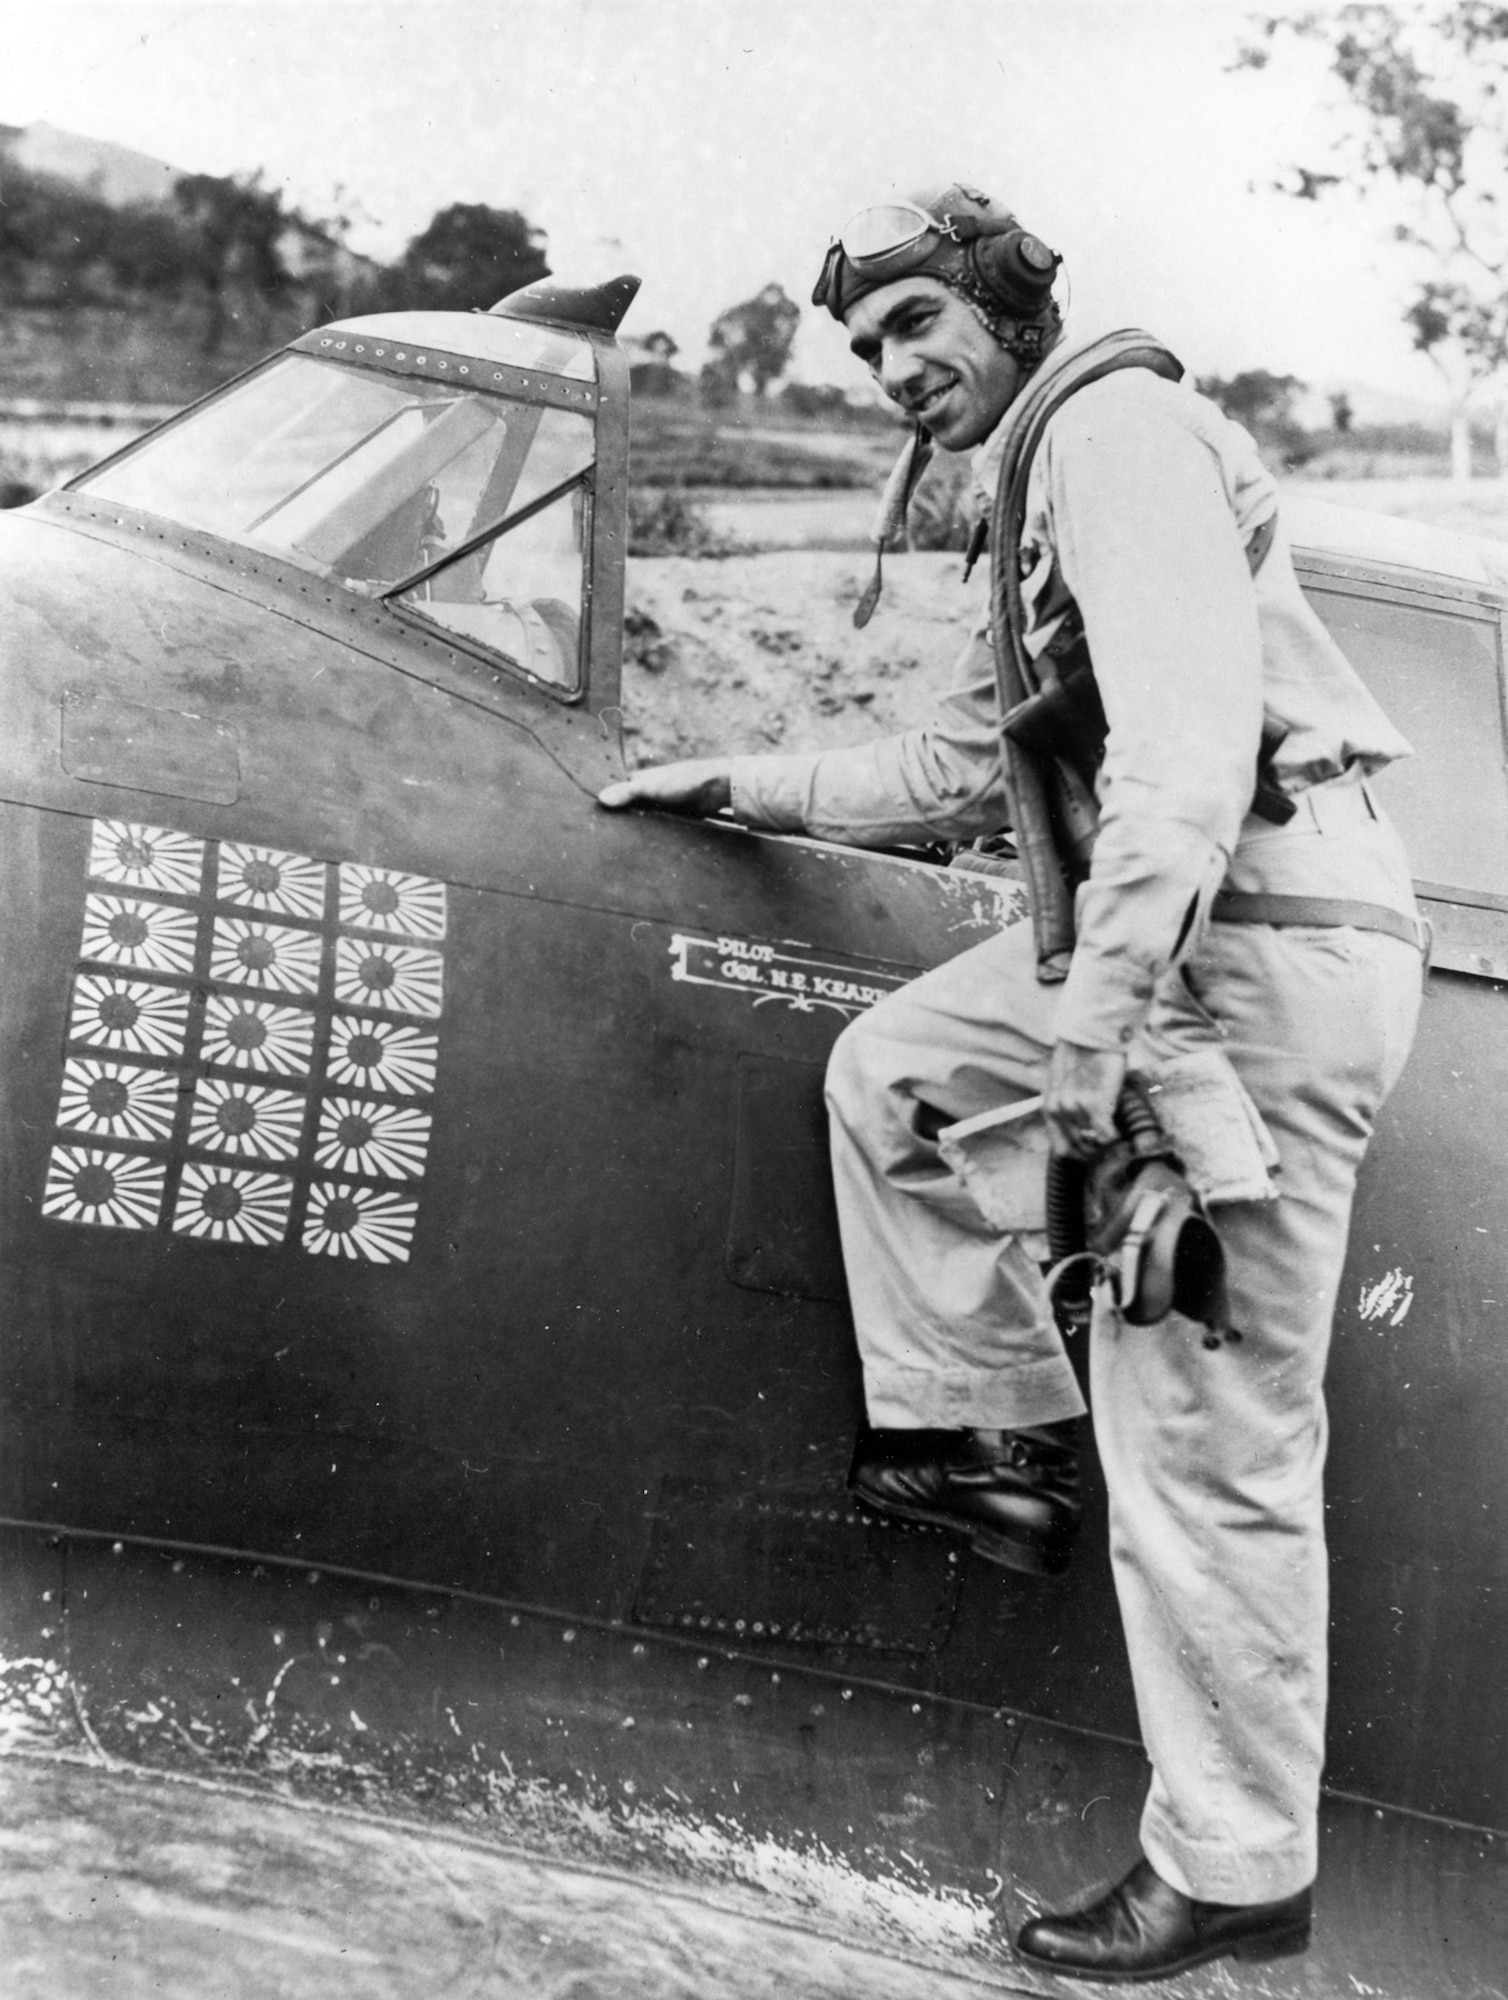 Medal of Honor recipient Col. Neel E. Kearby. (U.S. Air Force photo)